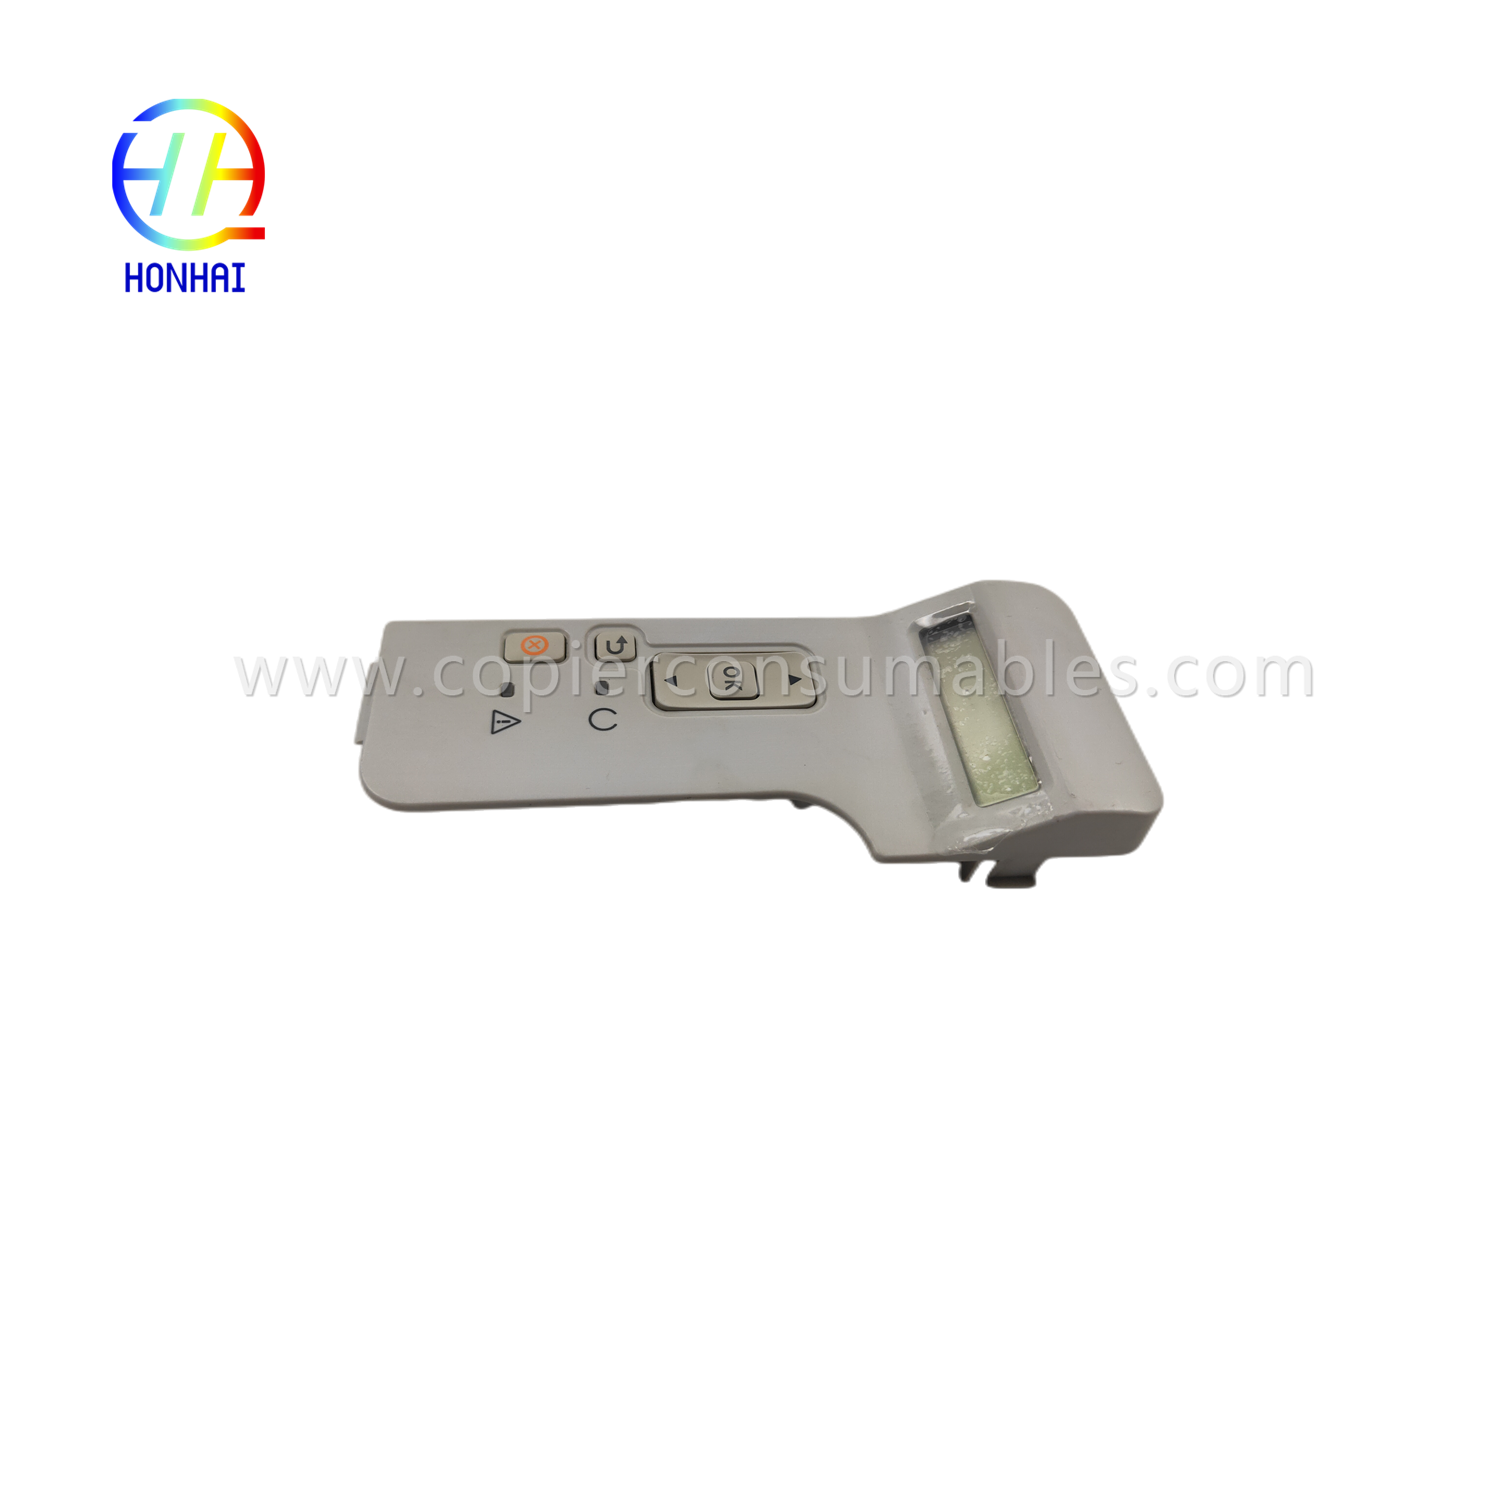 https://c585.grao.net/control-panel-display-for-hp-rc2-6262-p2030-p2035-p2055dn-ምርት/